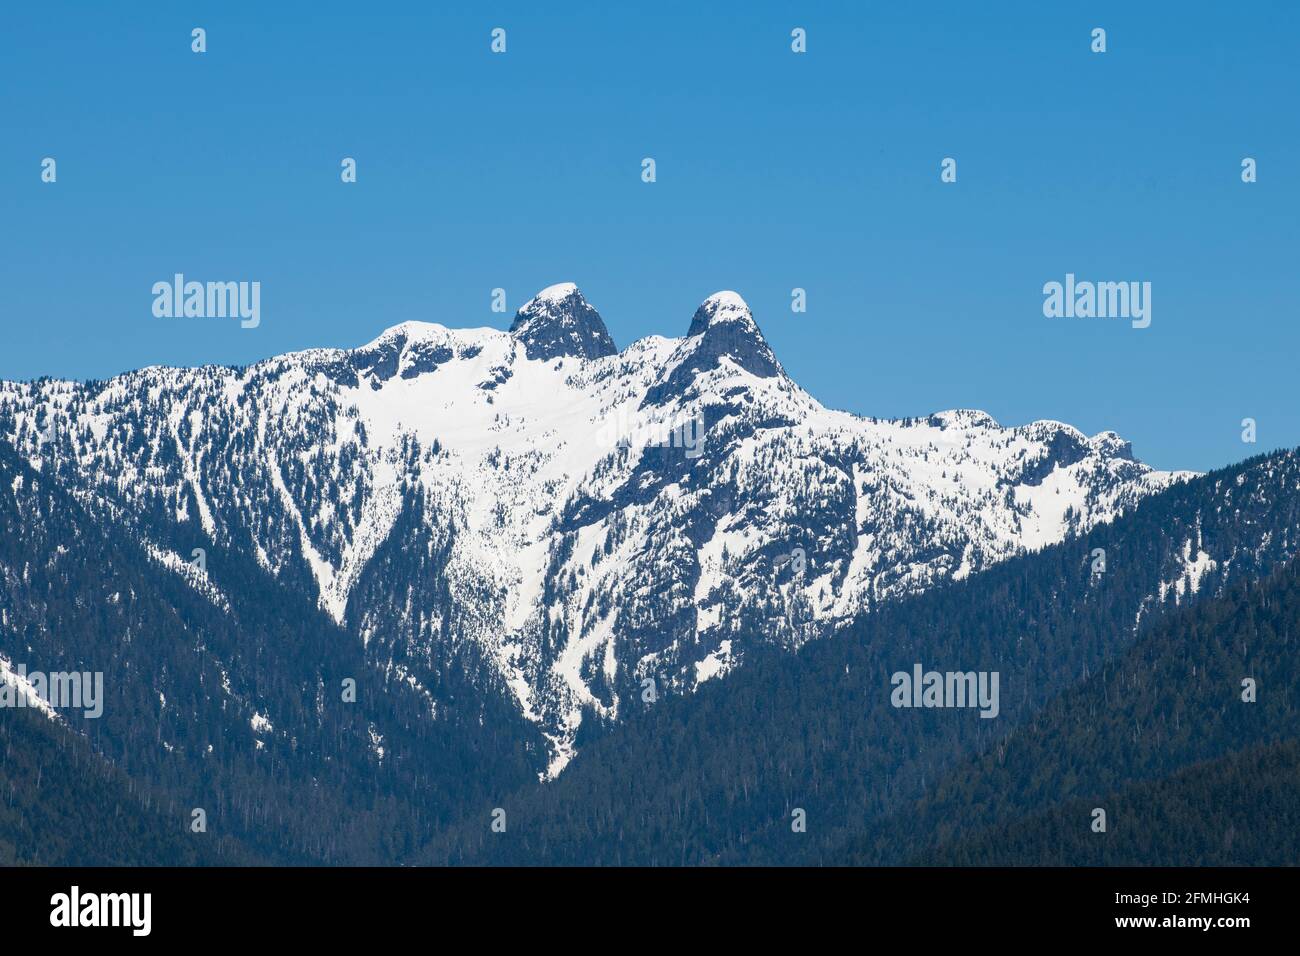 Vancouver's iconic twin peaks -The Lions, viewed from Capilano Regional Park in North Vancouver. Stock Photo